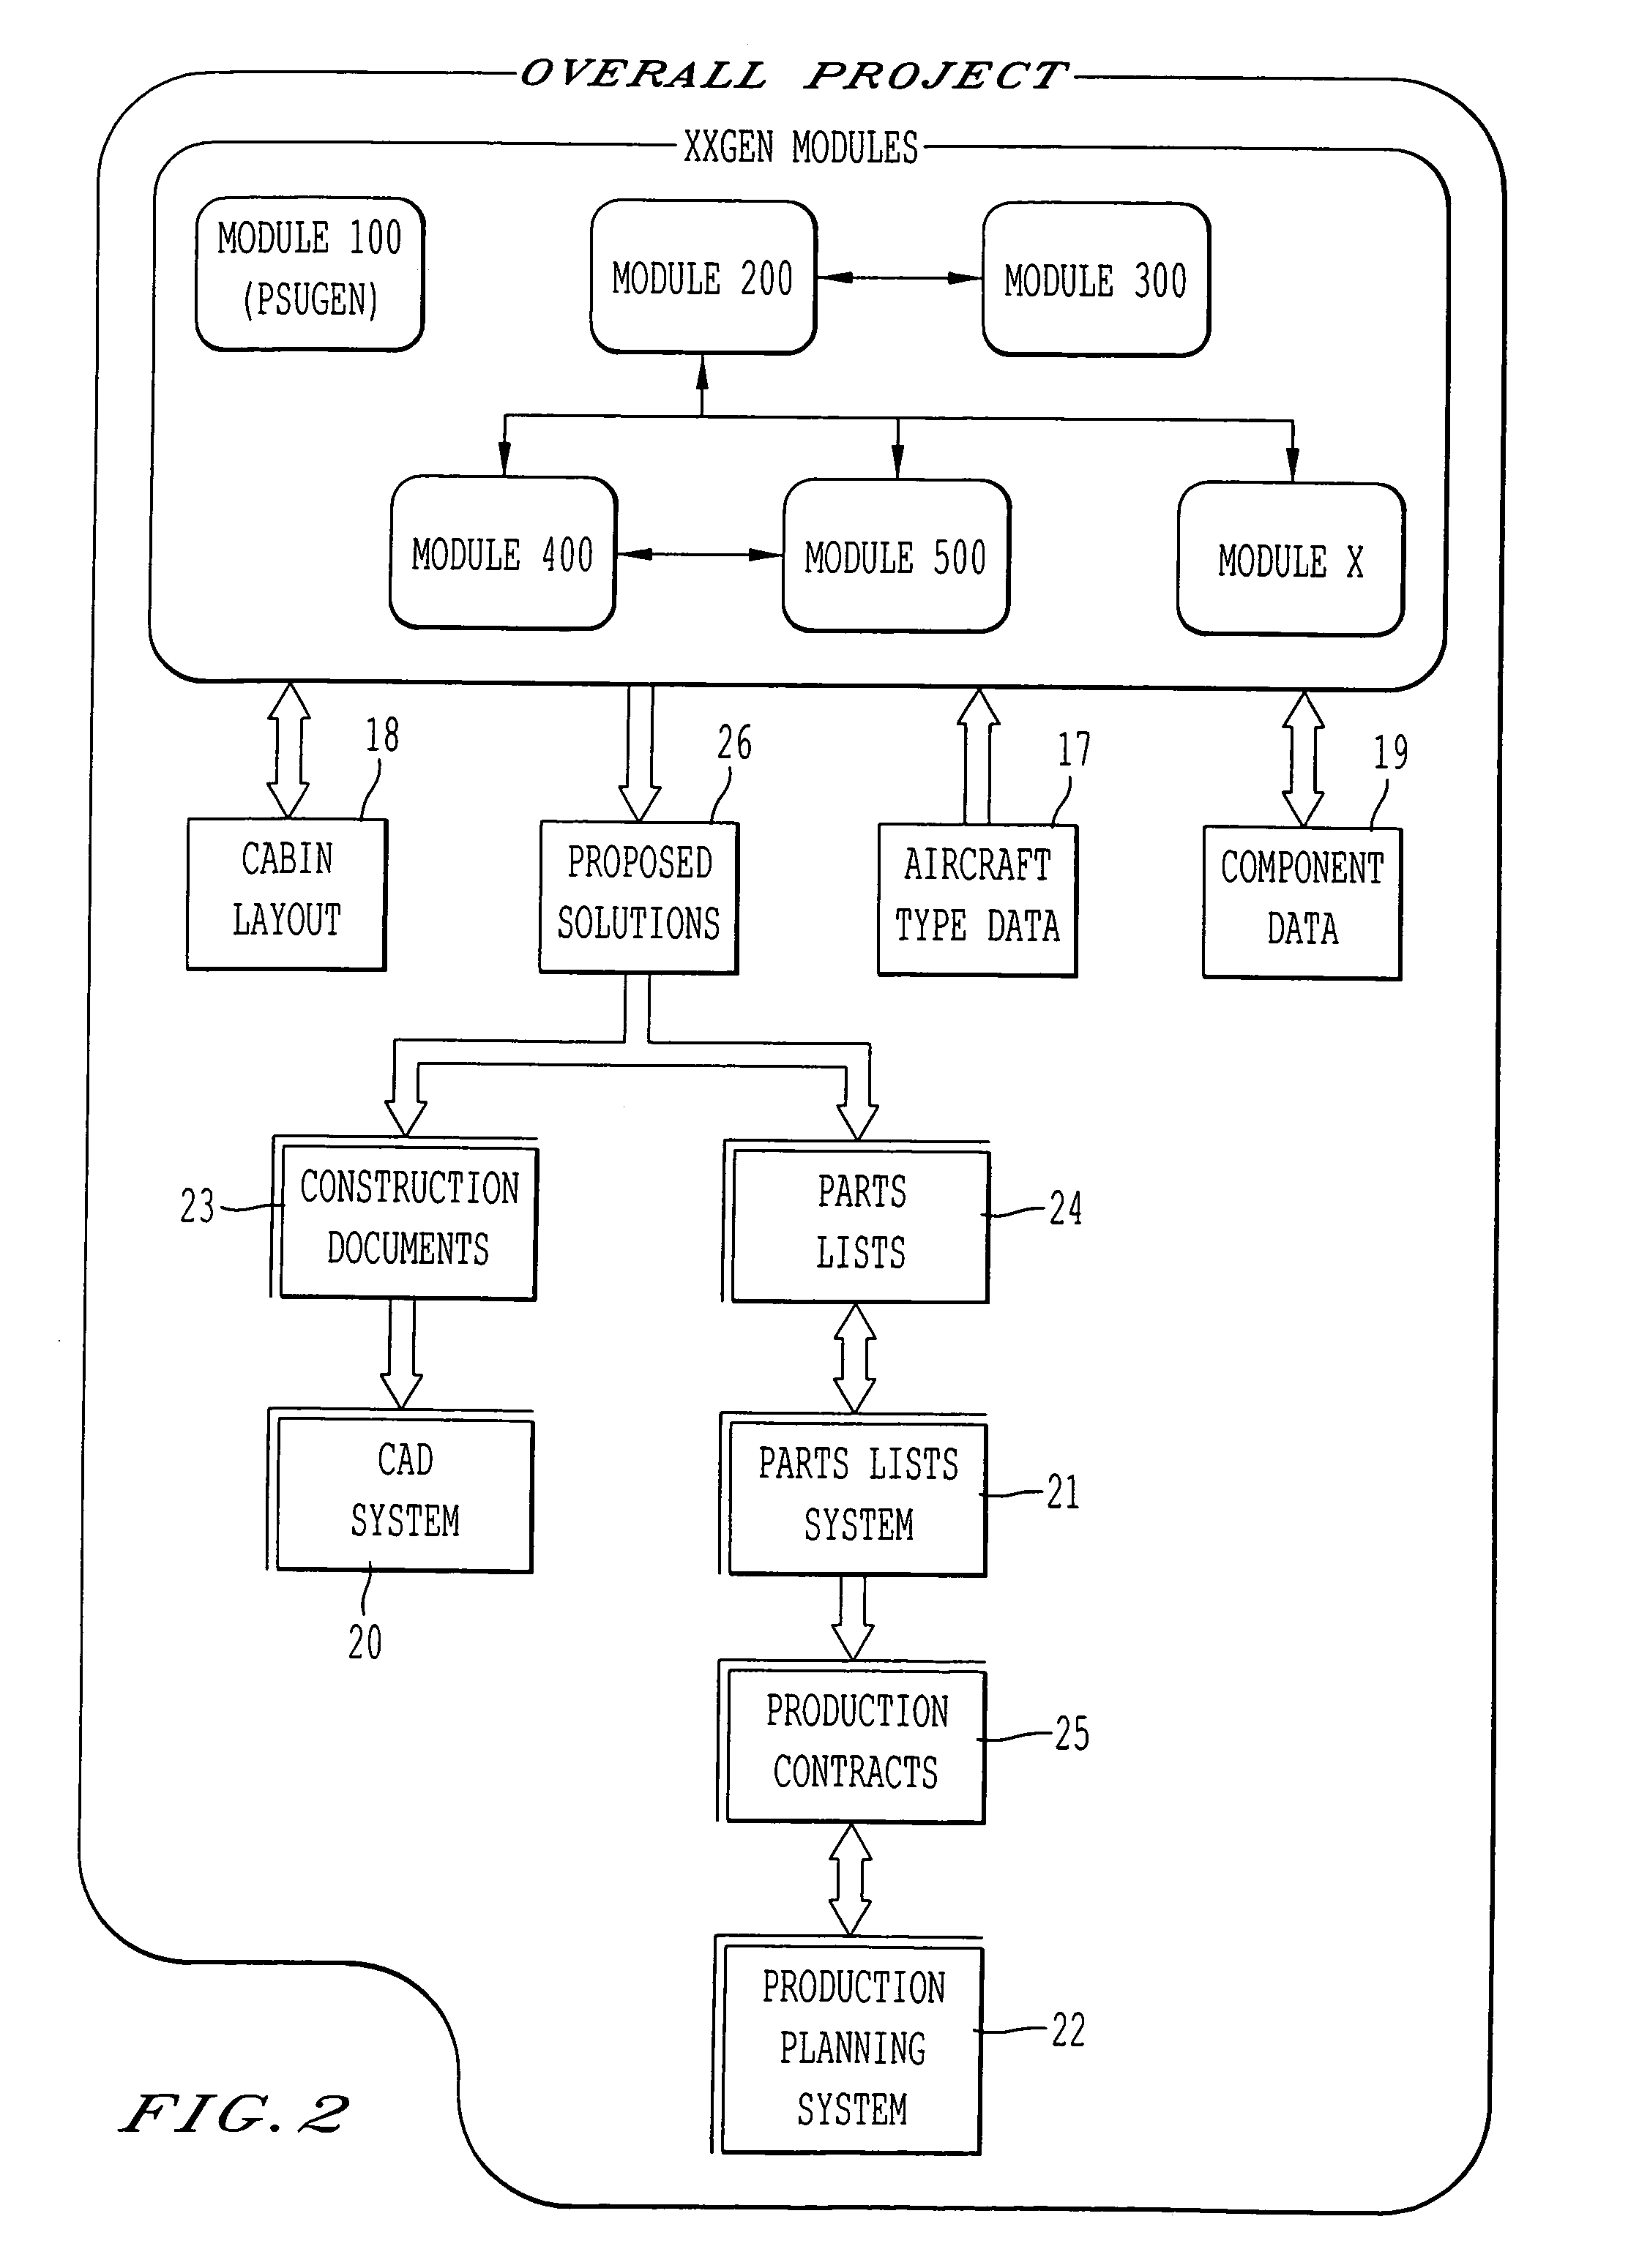 System for automatically configuring arrangements of components and automatically generating production documents